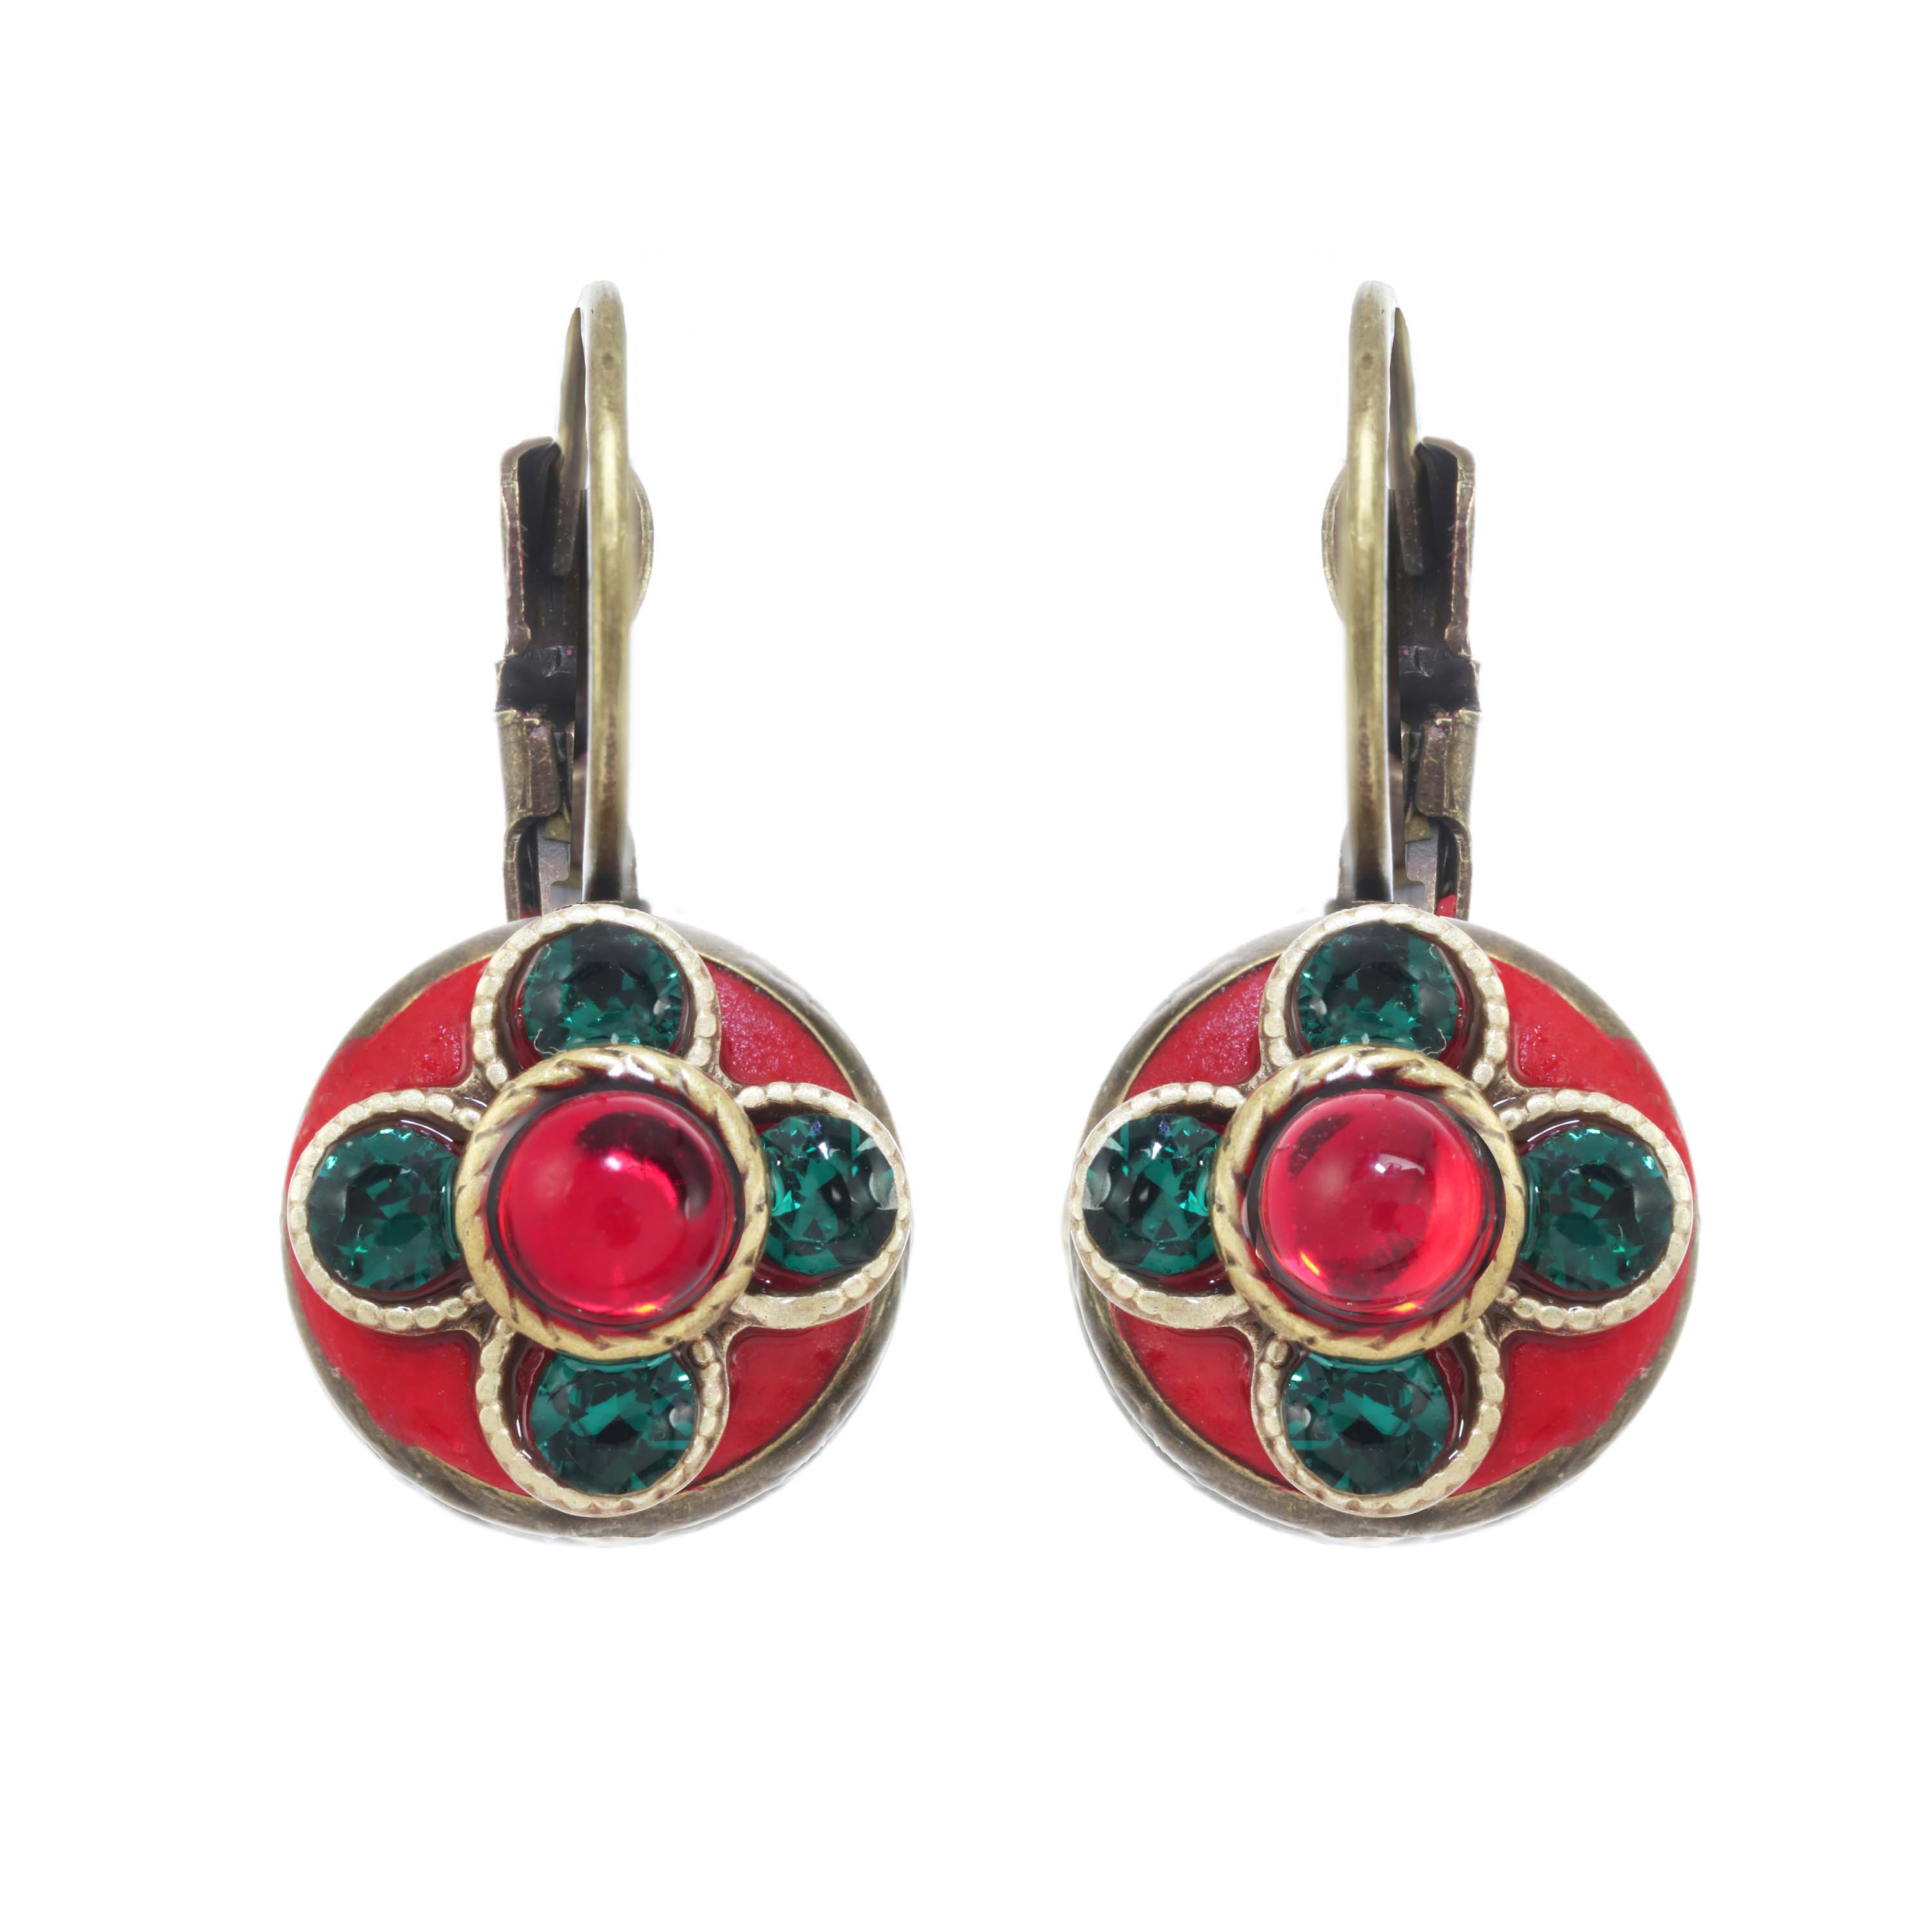 Dark Red and Green Earrings